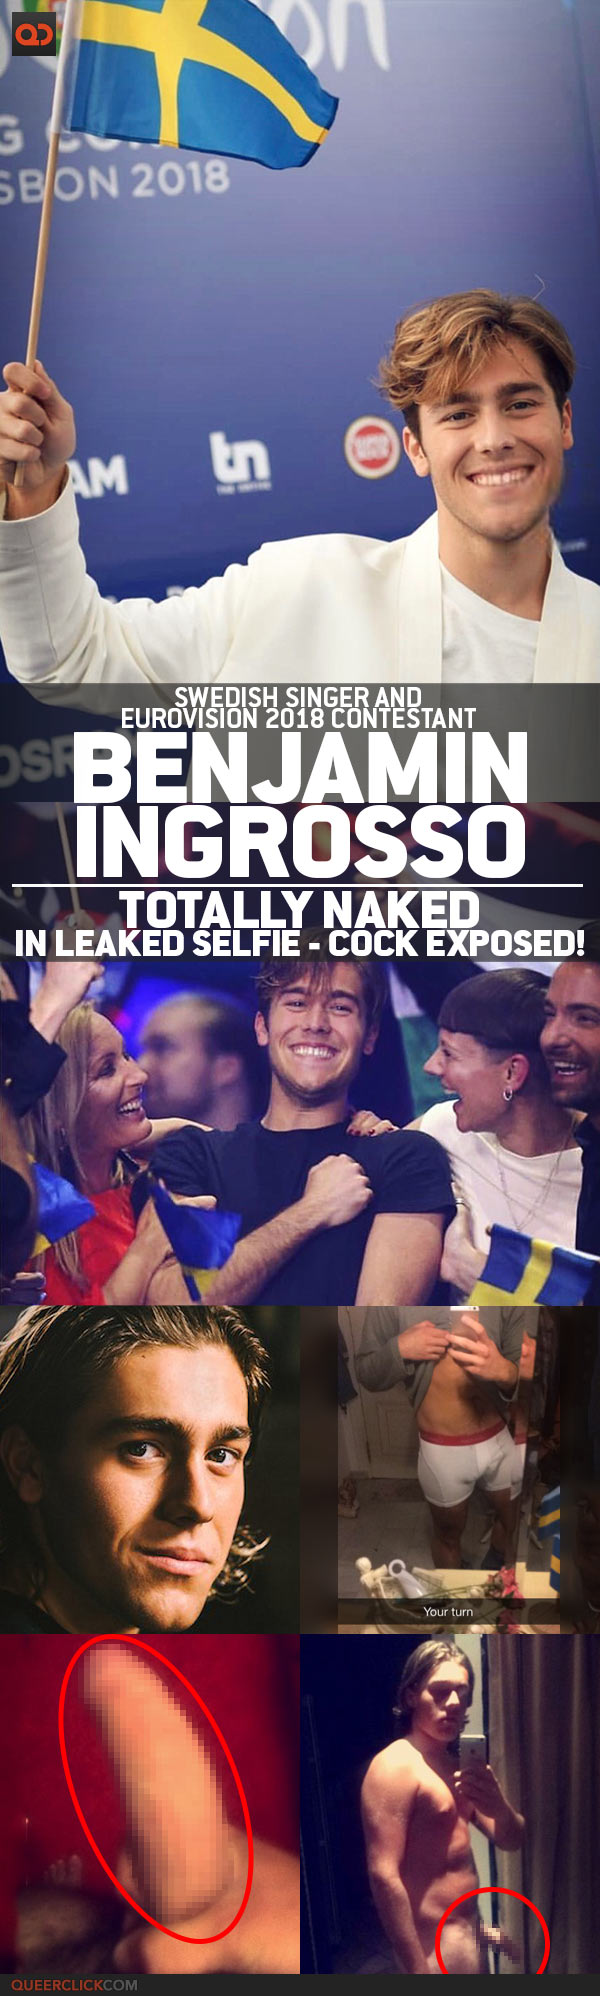 Benjamin Ingrosso, Swedish Singer And Eurovision 2018 Contestant, Totally Naked In Leaked Selfie - Cock Exposed!